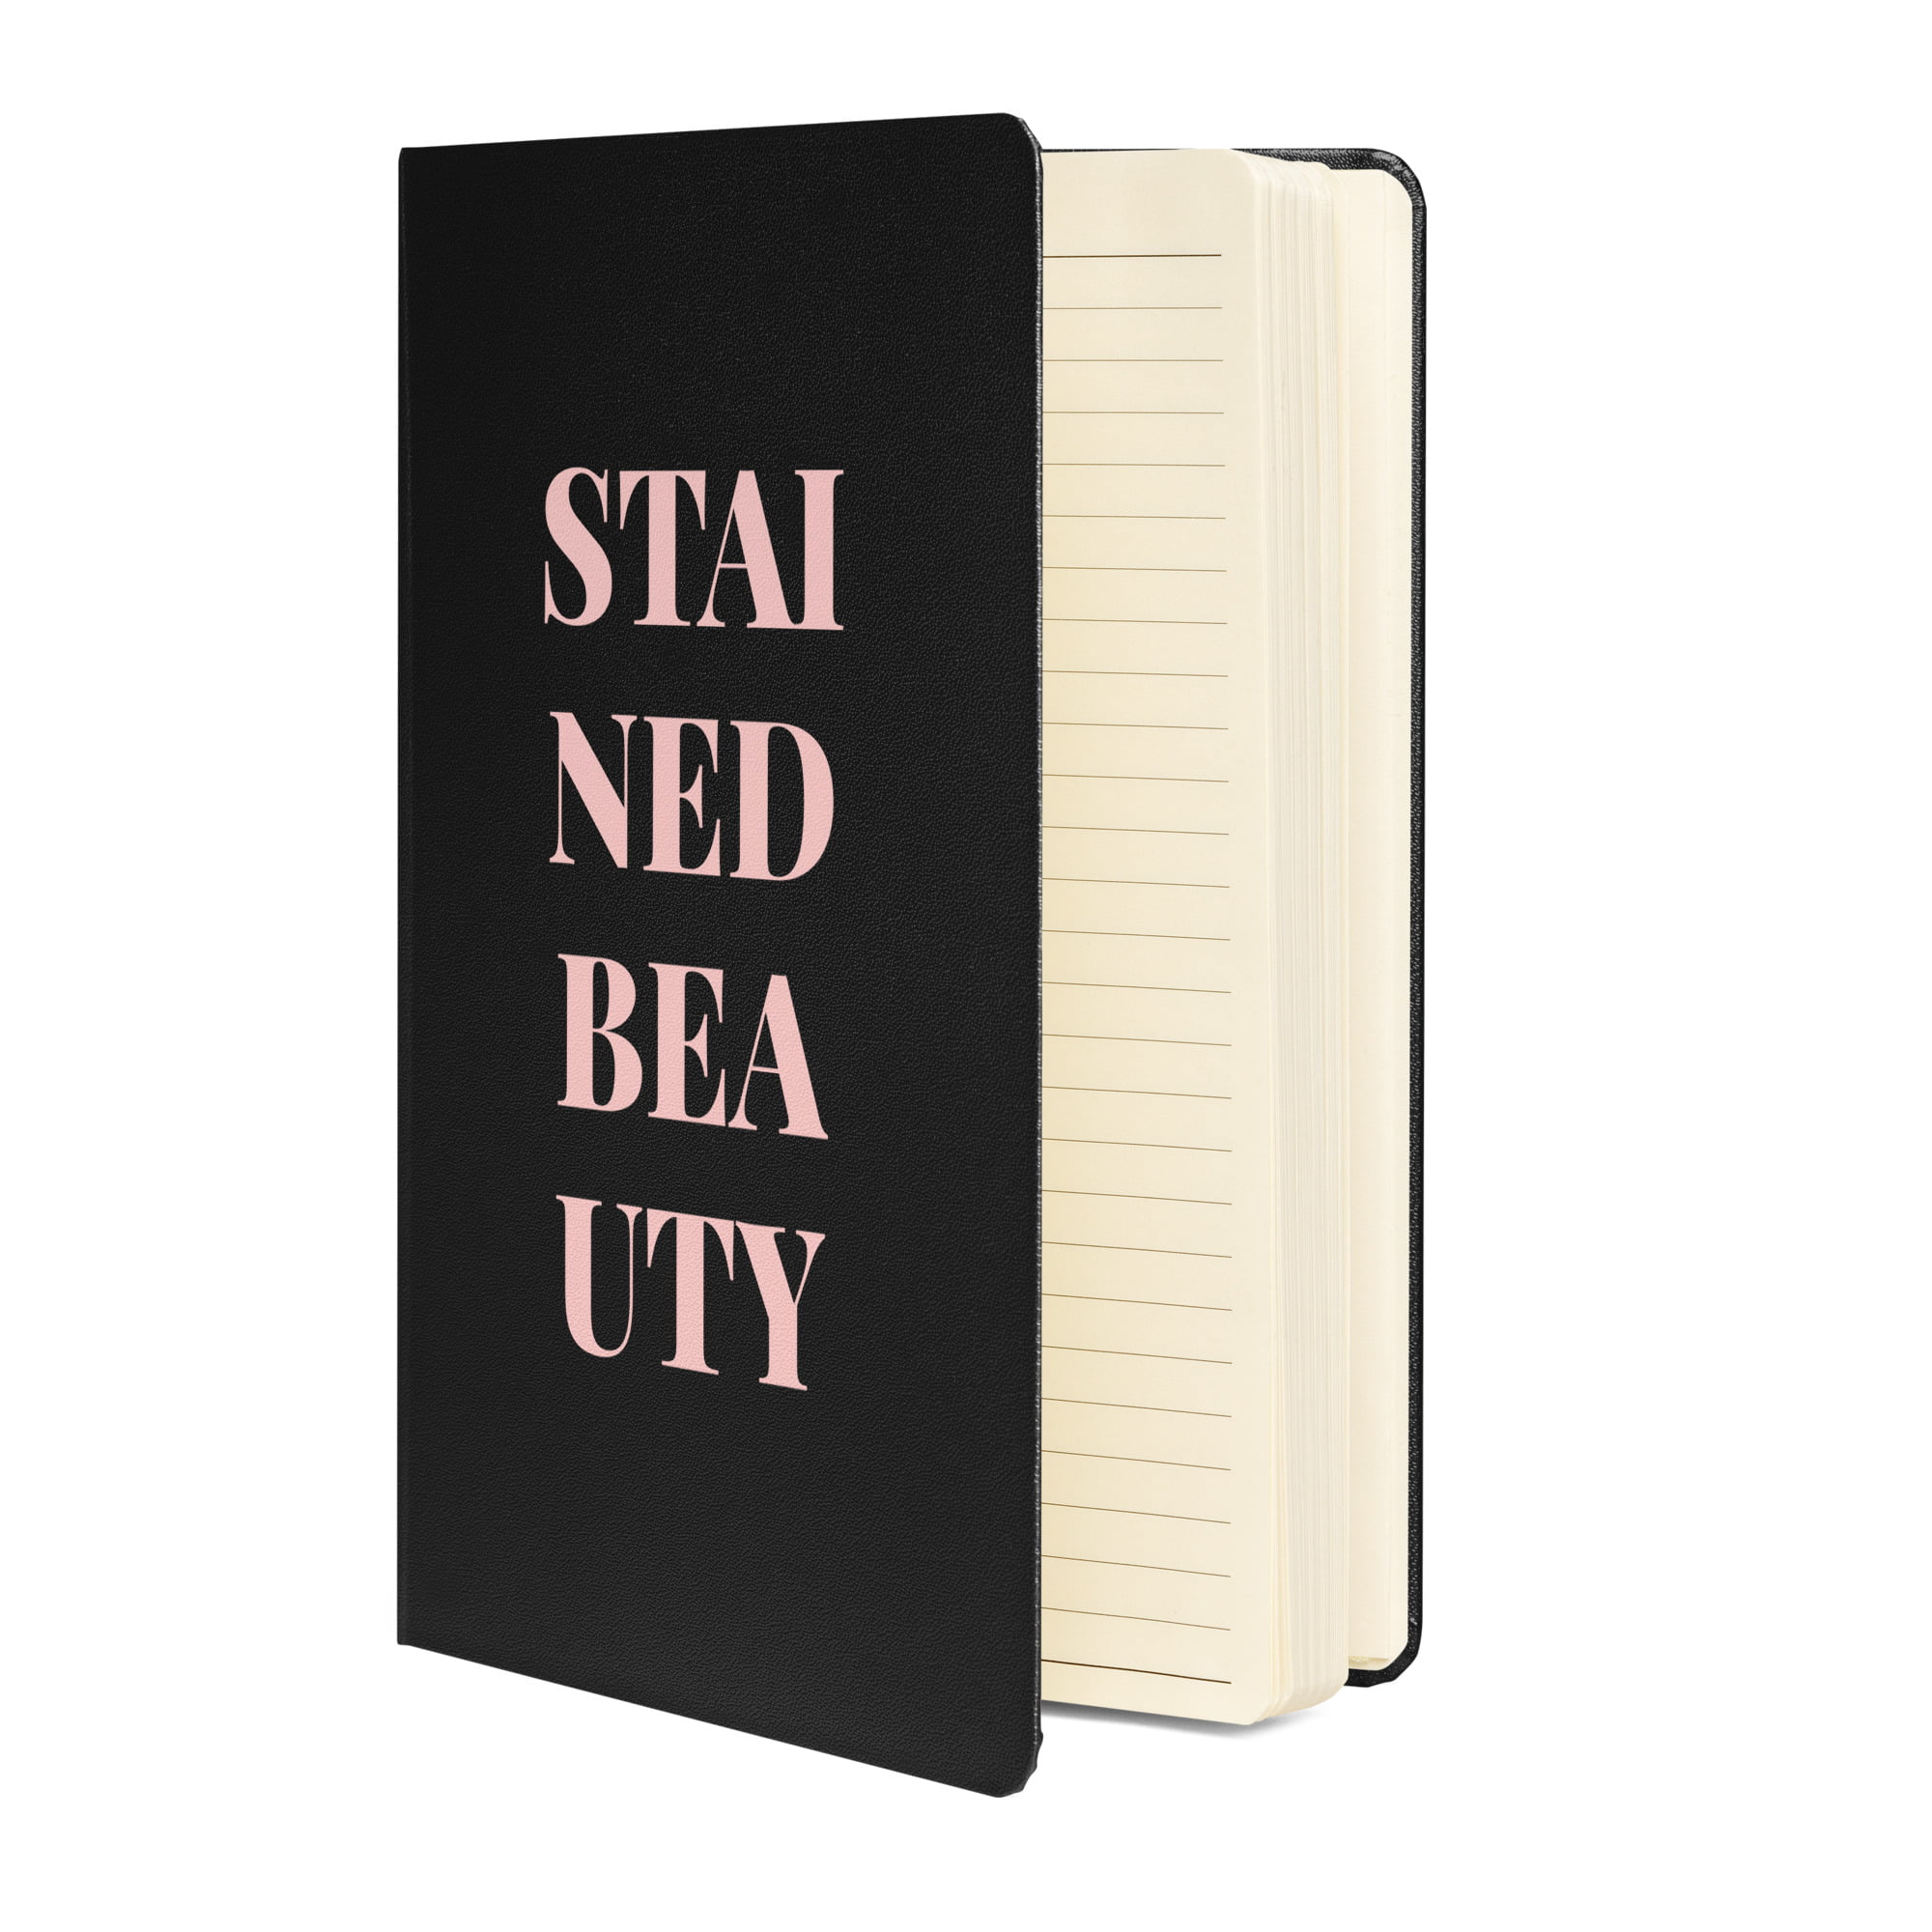 hardcover bound notebook black front 6509a88445c19.jpg